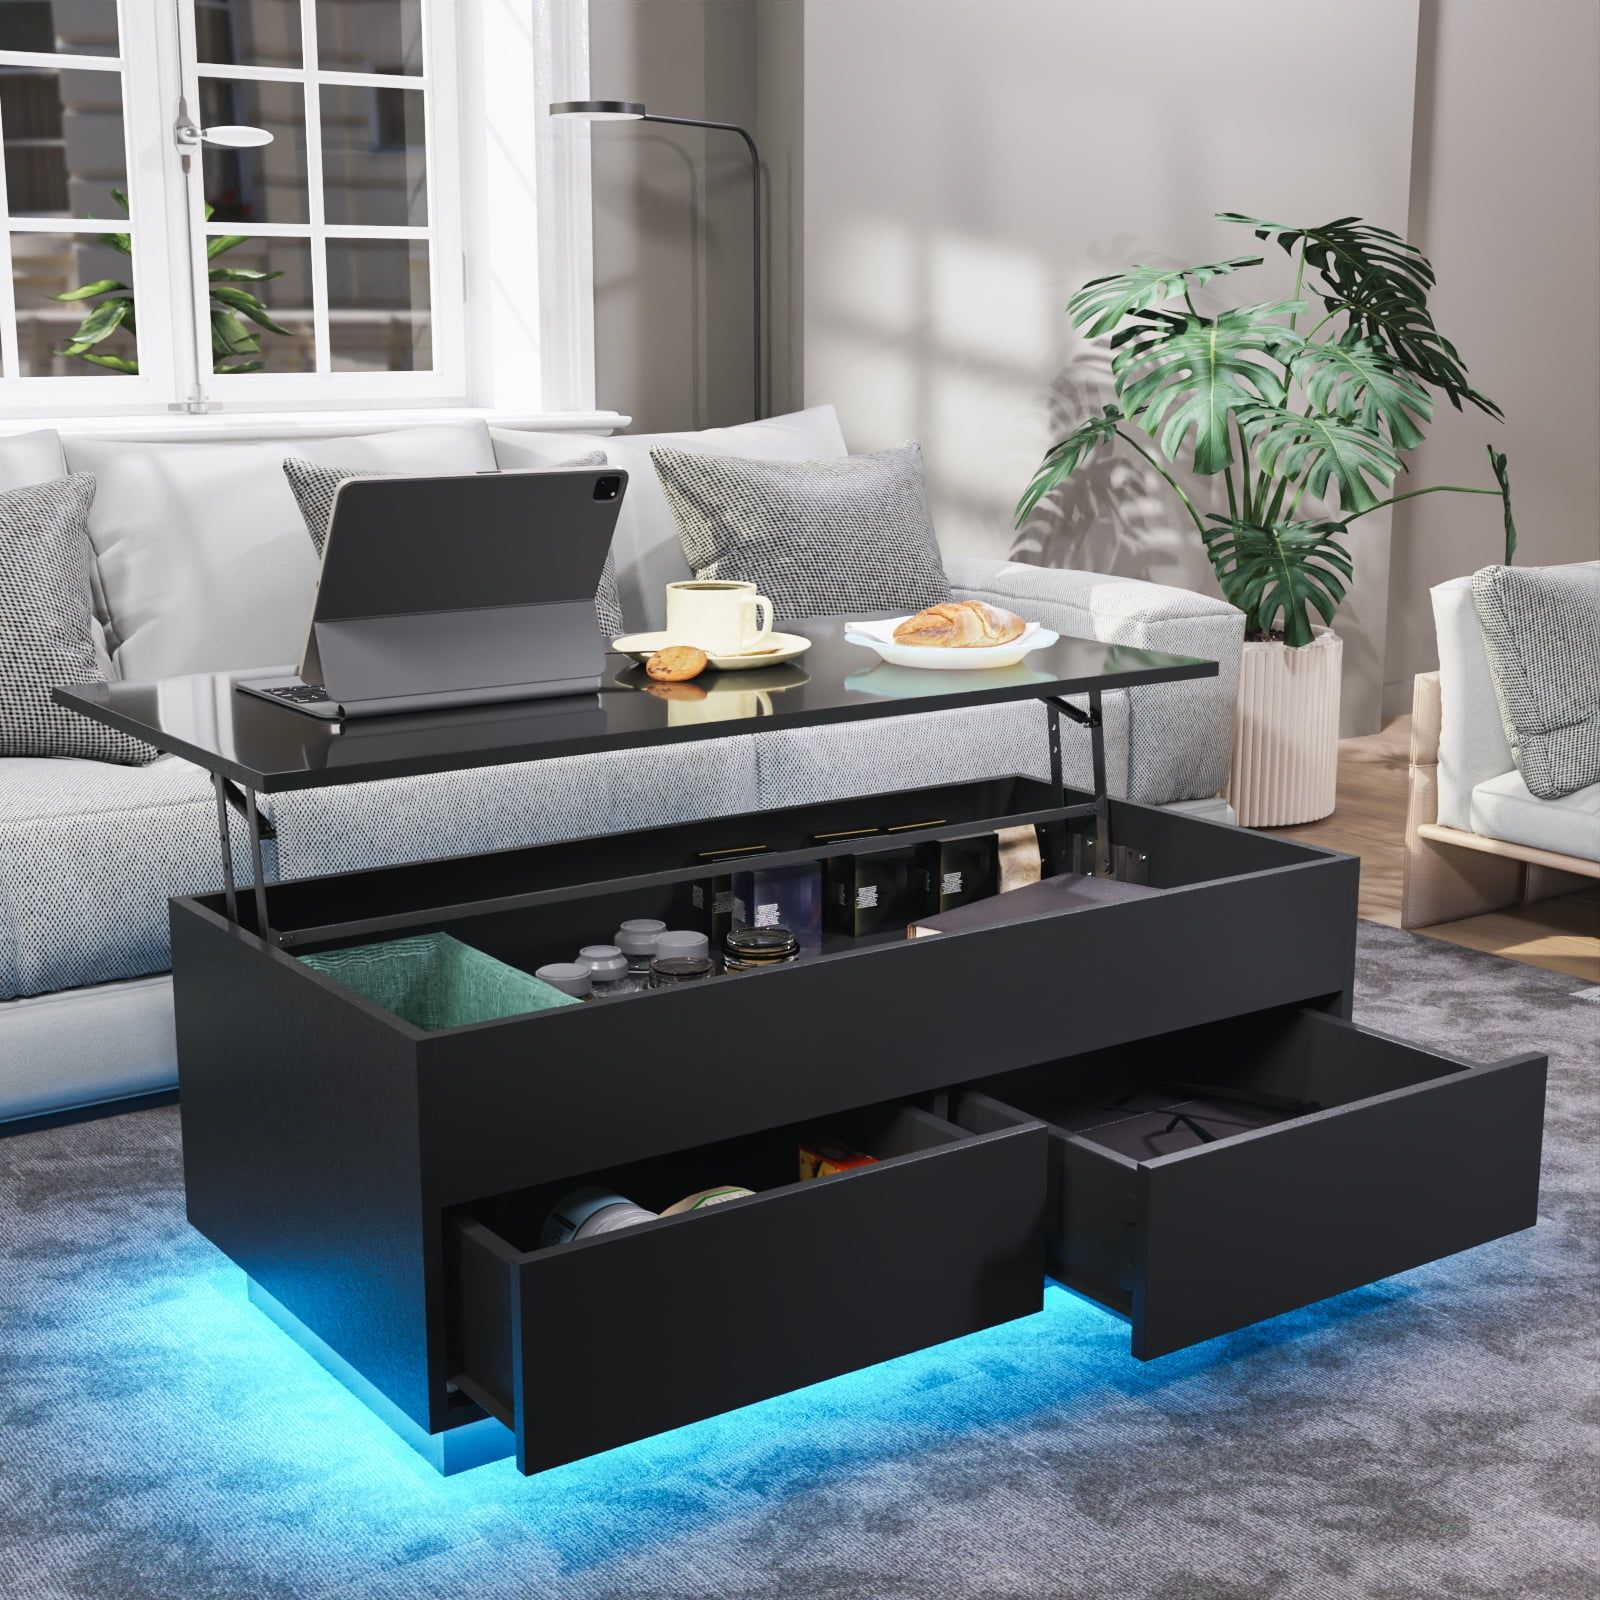 Hommpa Lift Top Coffee Table Led Tea Table With 2 Storage Drawers And  Hidden Compartment Rectangle Rising Accent Cocktail Desk Black – Walmart Regarding Coffee Tables With Drawers And Led Lights (View 9 of 15)